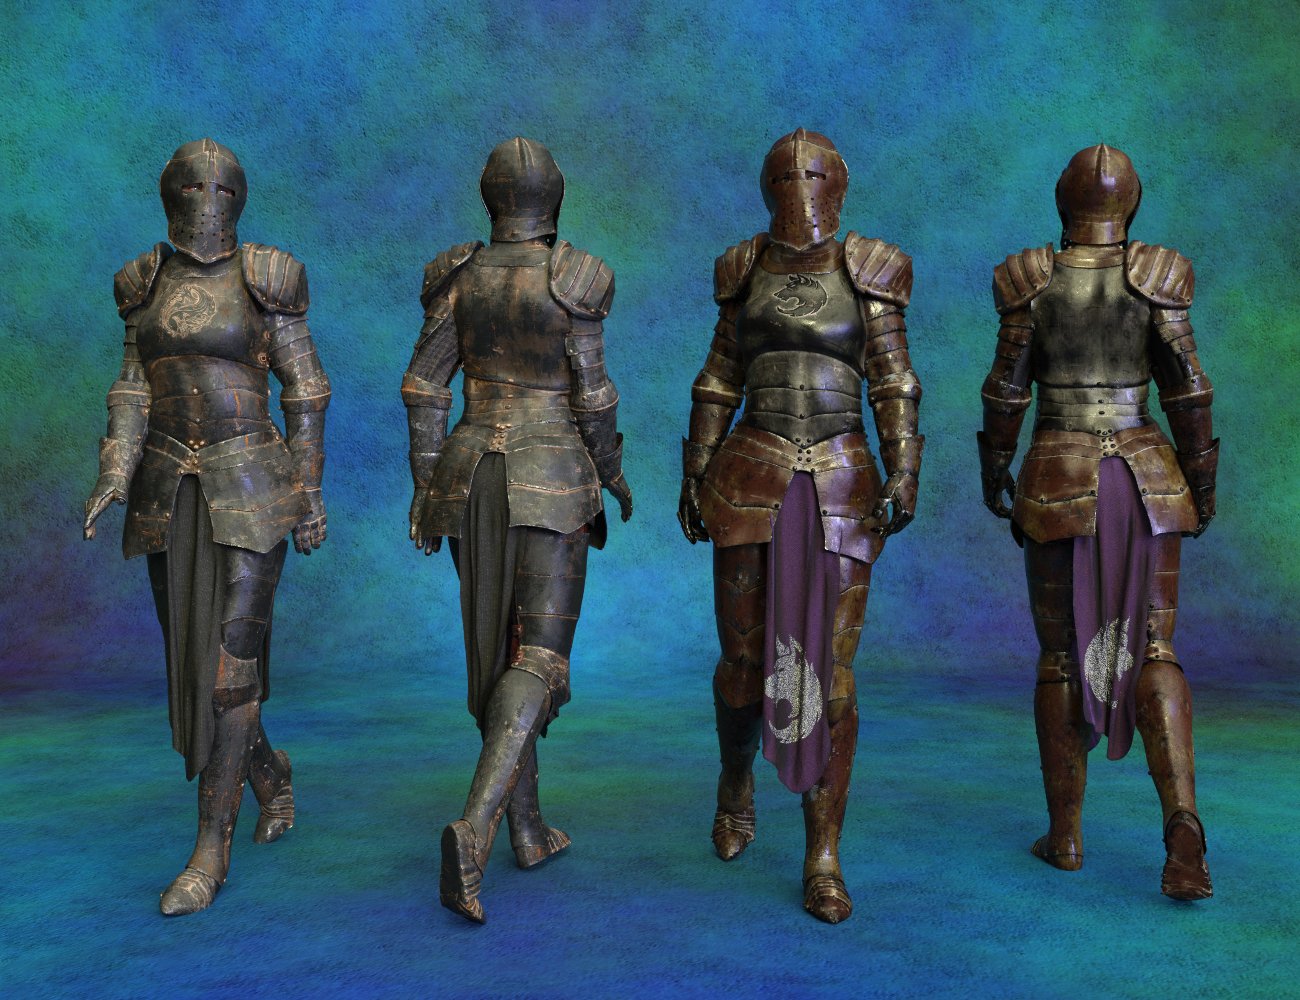 dForce Morphing Fantasy Armor for Genesis 8 Female(s) by: SickleyieldMoonscape GraphicsSade, 3D Models by Daz 3D